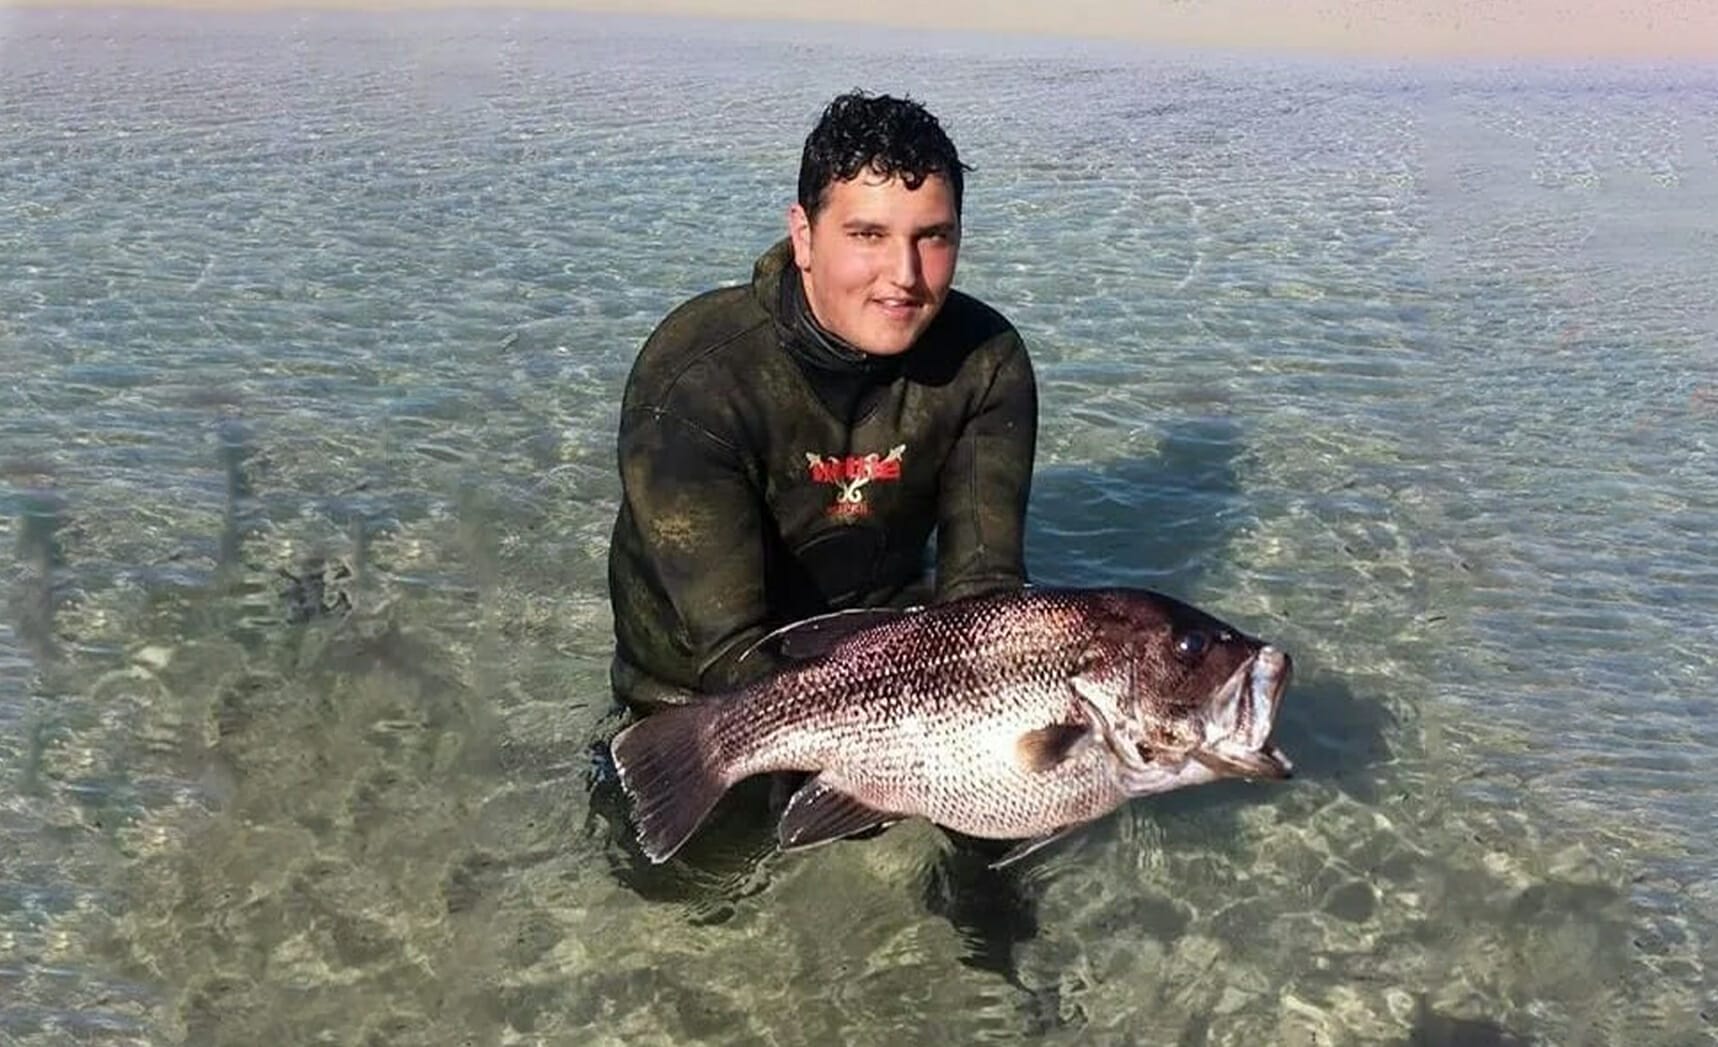 Jay with a Dhufish